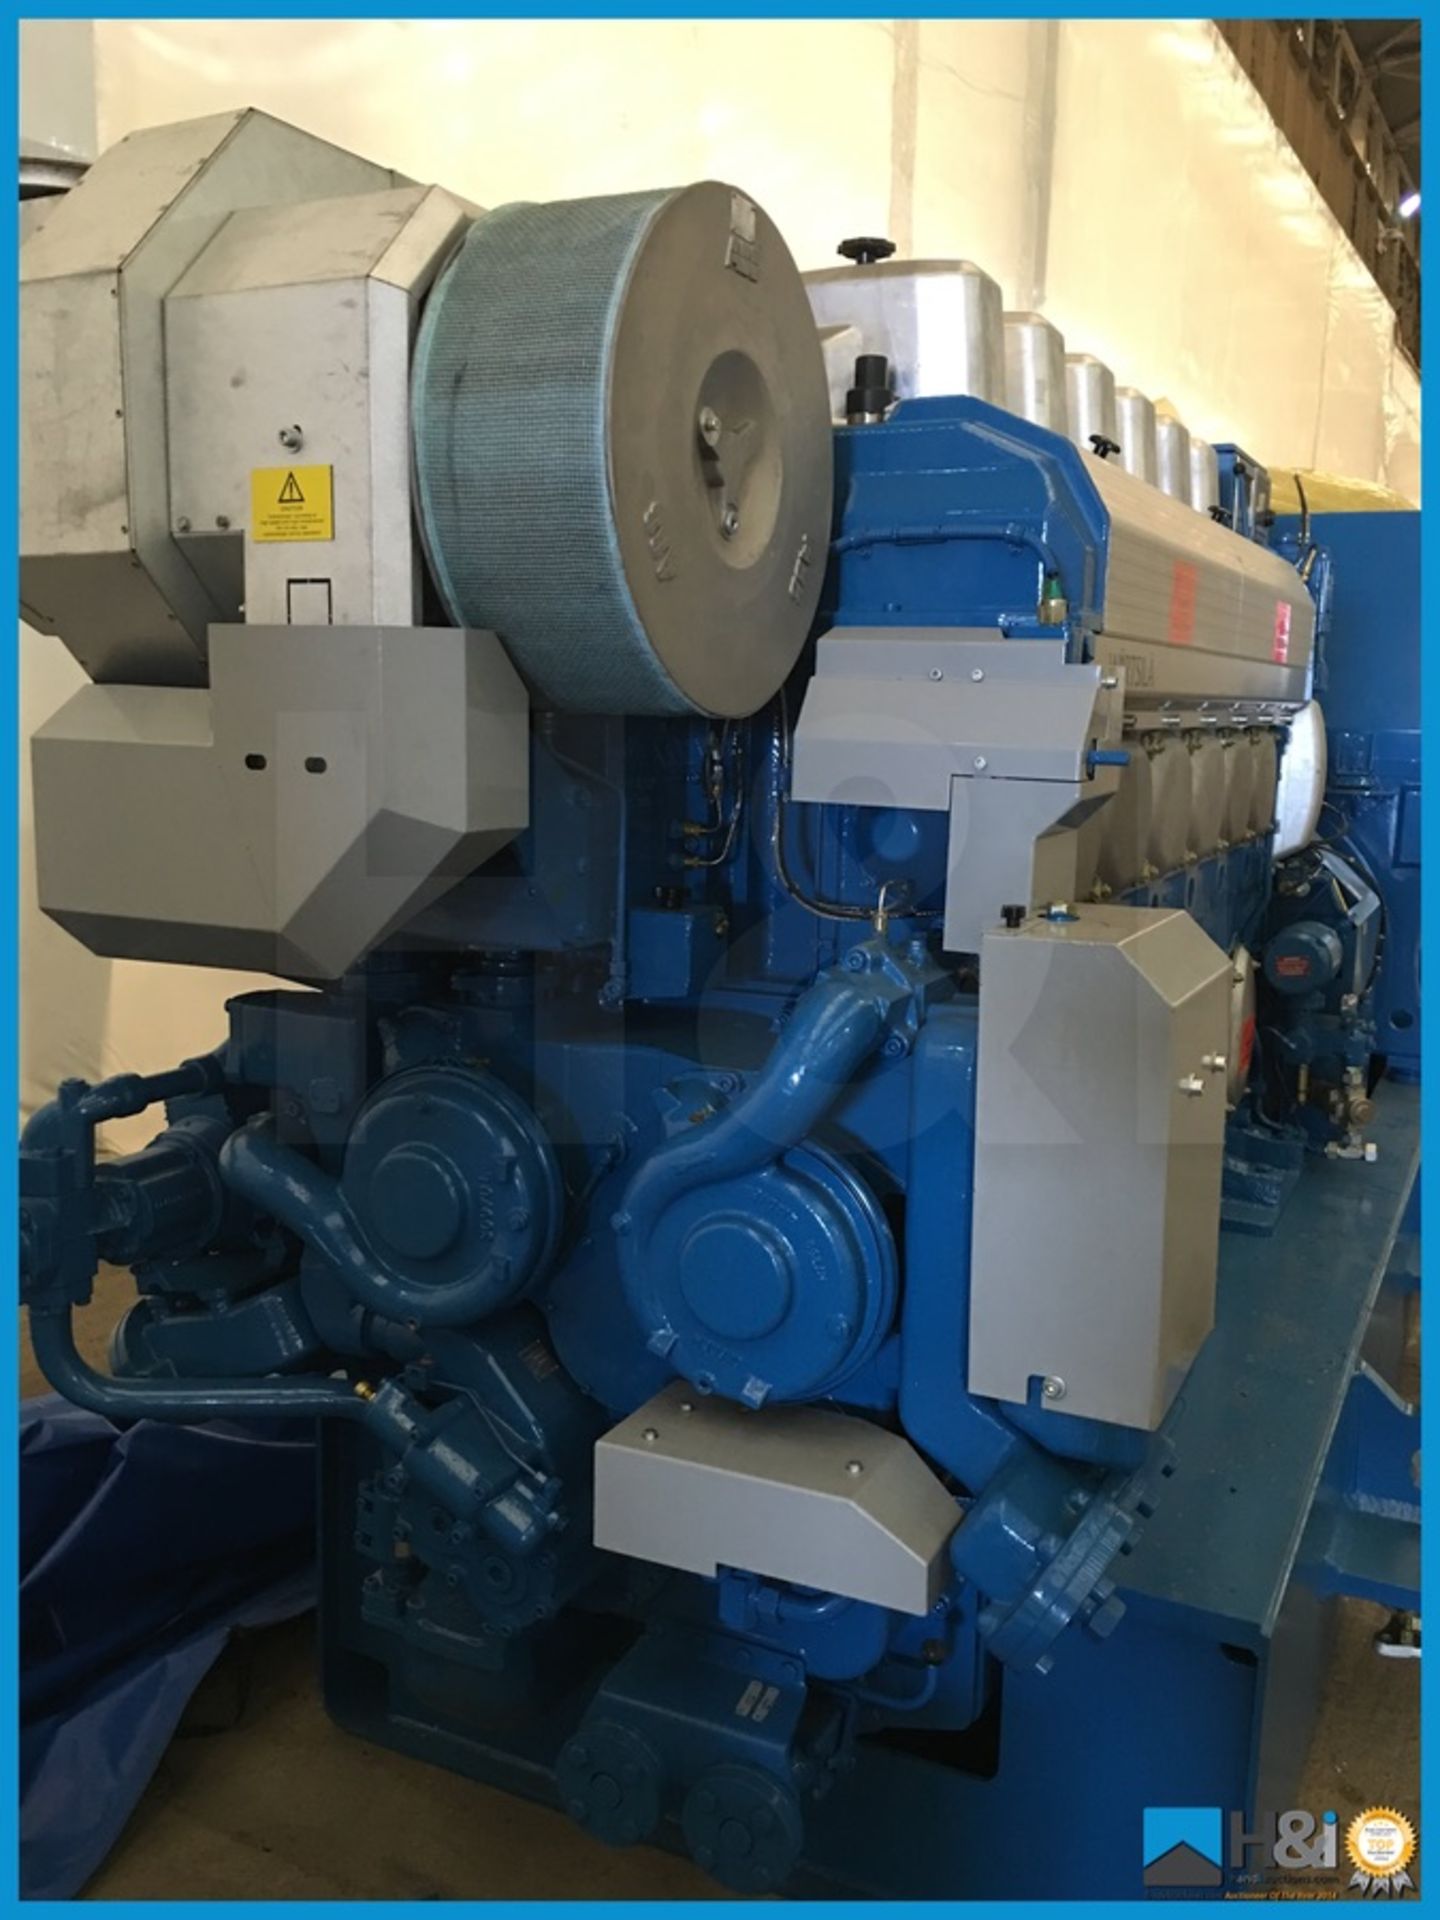 Unused Wartsila 6L20 high capacity diesel generator manufactured in 2013 for a large marine - Image 6 of 22